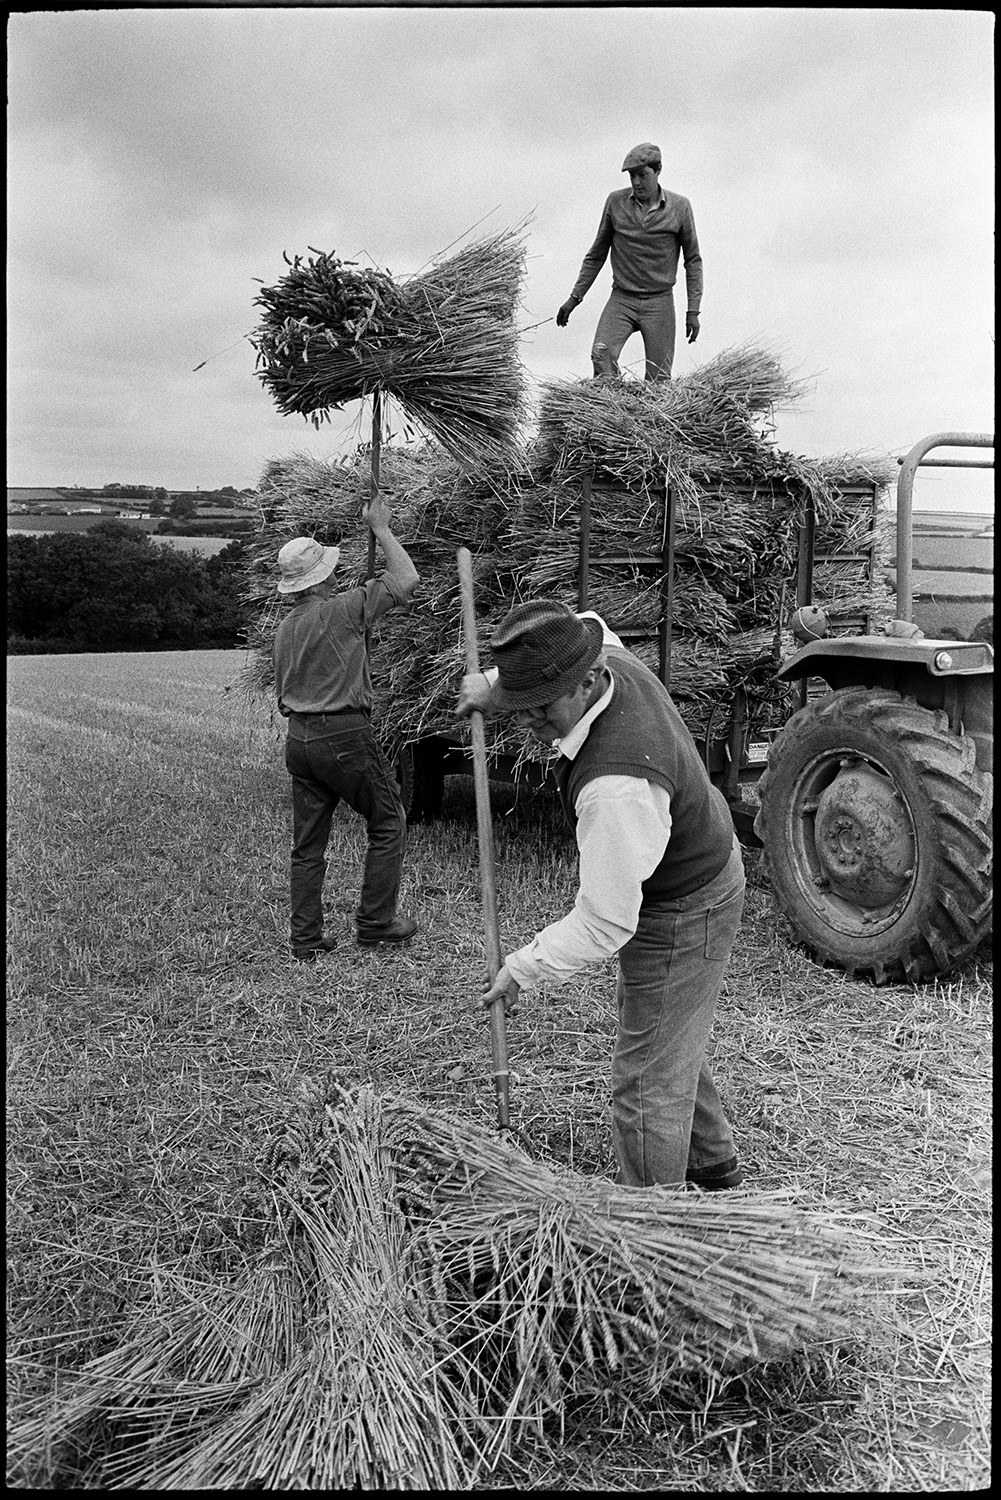 Farmers making wheatrick from stooks, loading trailer. 
[Three men loading bundles of wheat onto a trailer in a field at Westacott, Riddlecombe. Two men are lifting the bundles using pitchforks and the other man is on the trailer stacking the bundles. The wheat is being taken to make a wheat rick in another field.]